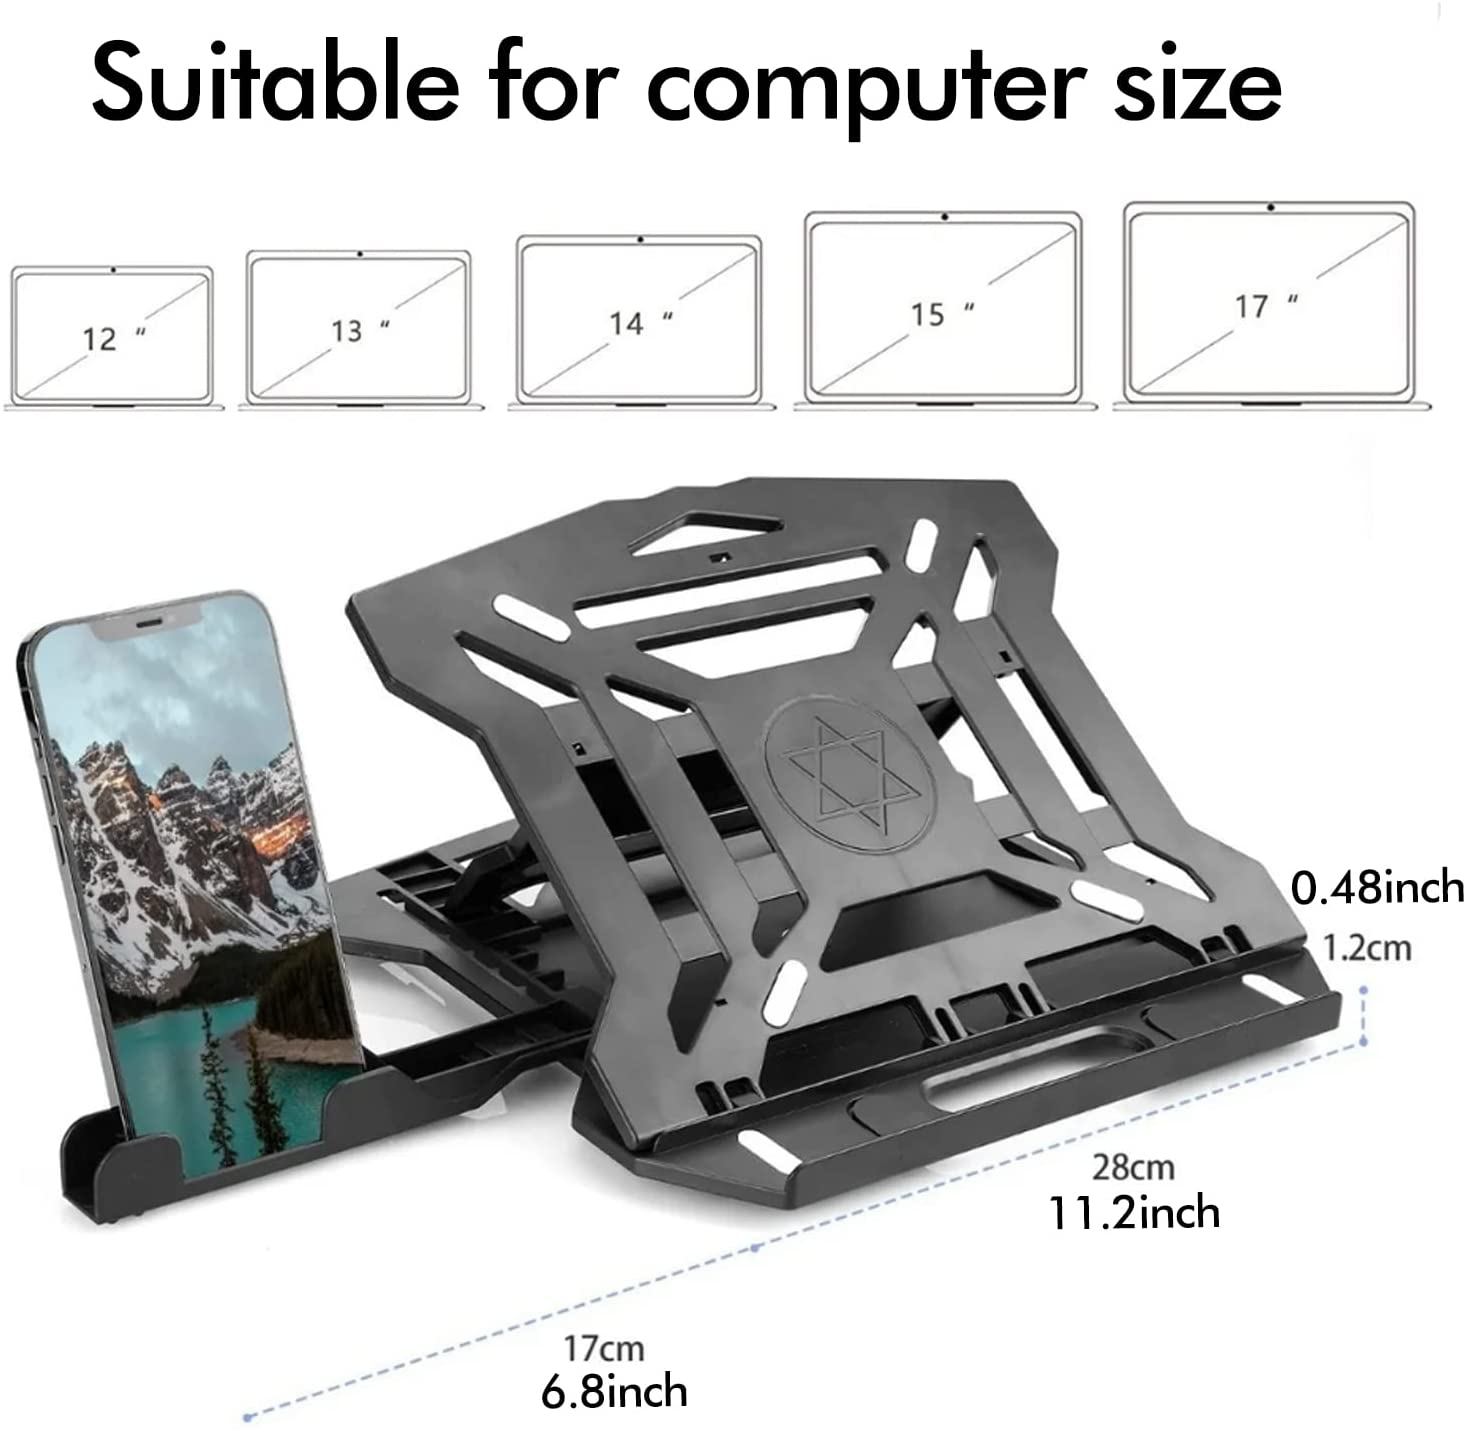 Laptop Stand for Desk,Portable 360° Rotation Laptop Riser Holder Supports up to 22Lbs, 8 Levels Adjustable Height Computer Accessories,Compatible with Macbook Pro,Ipad,All Notebook Tablets 11-18"